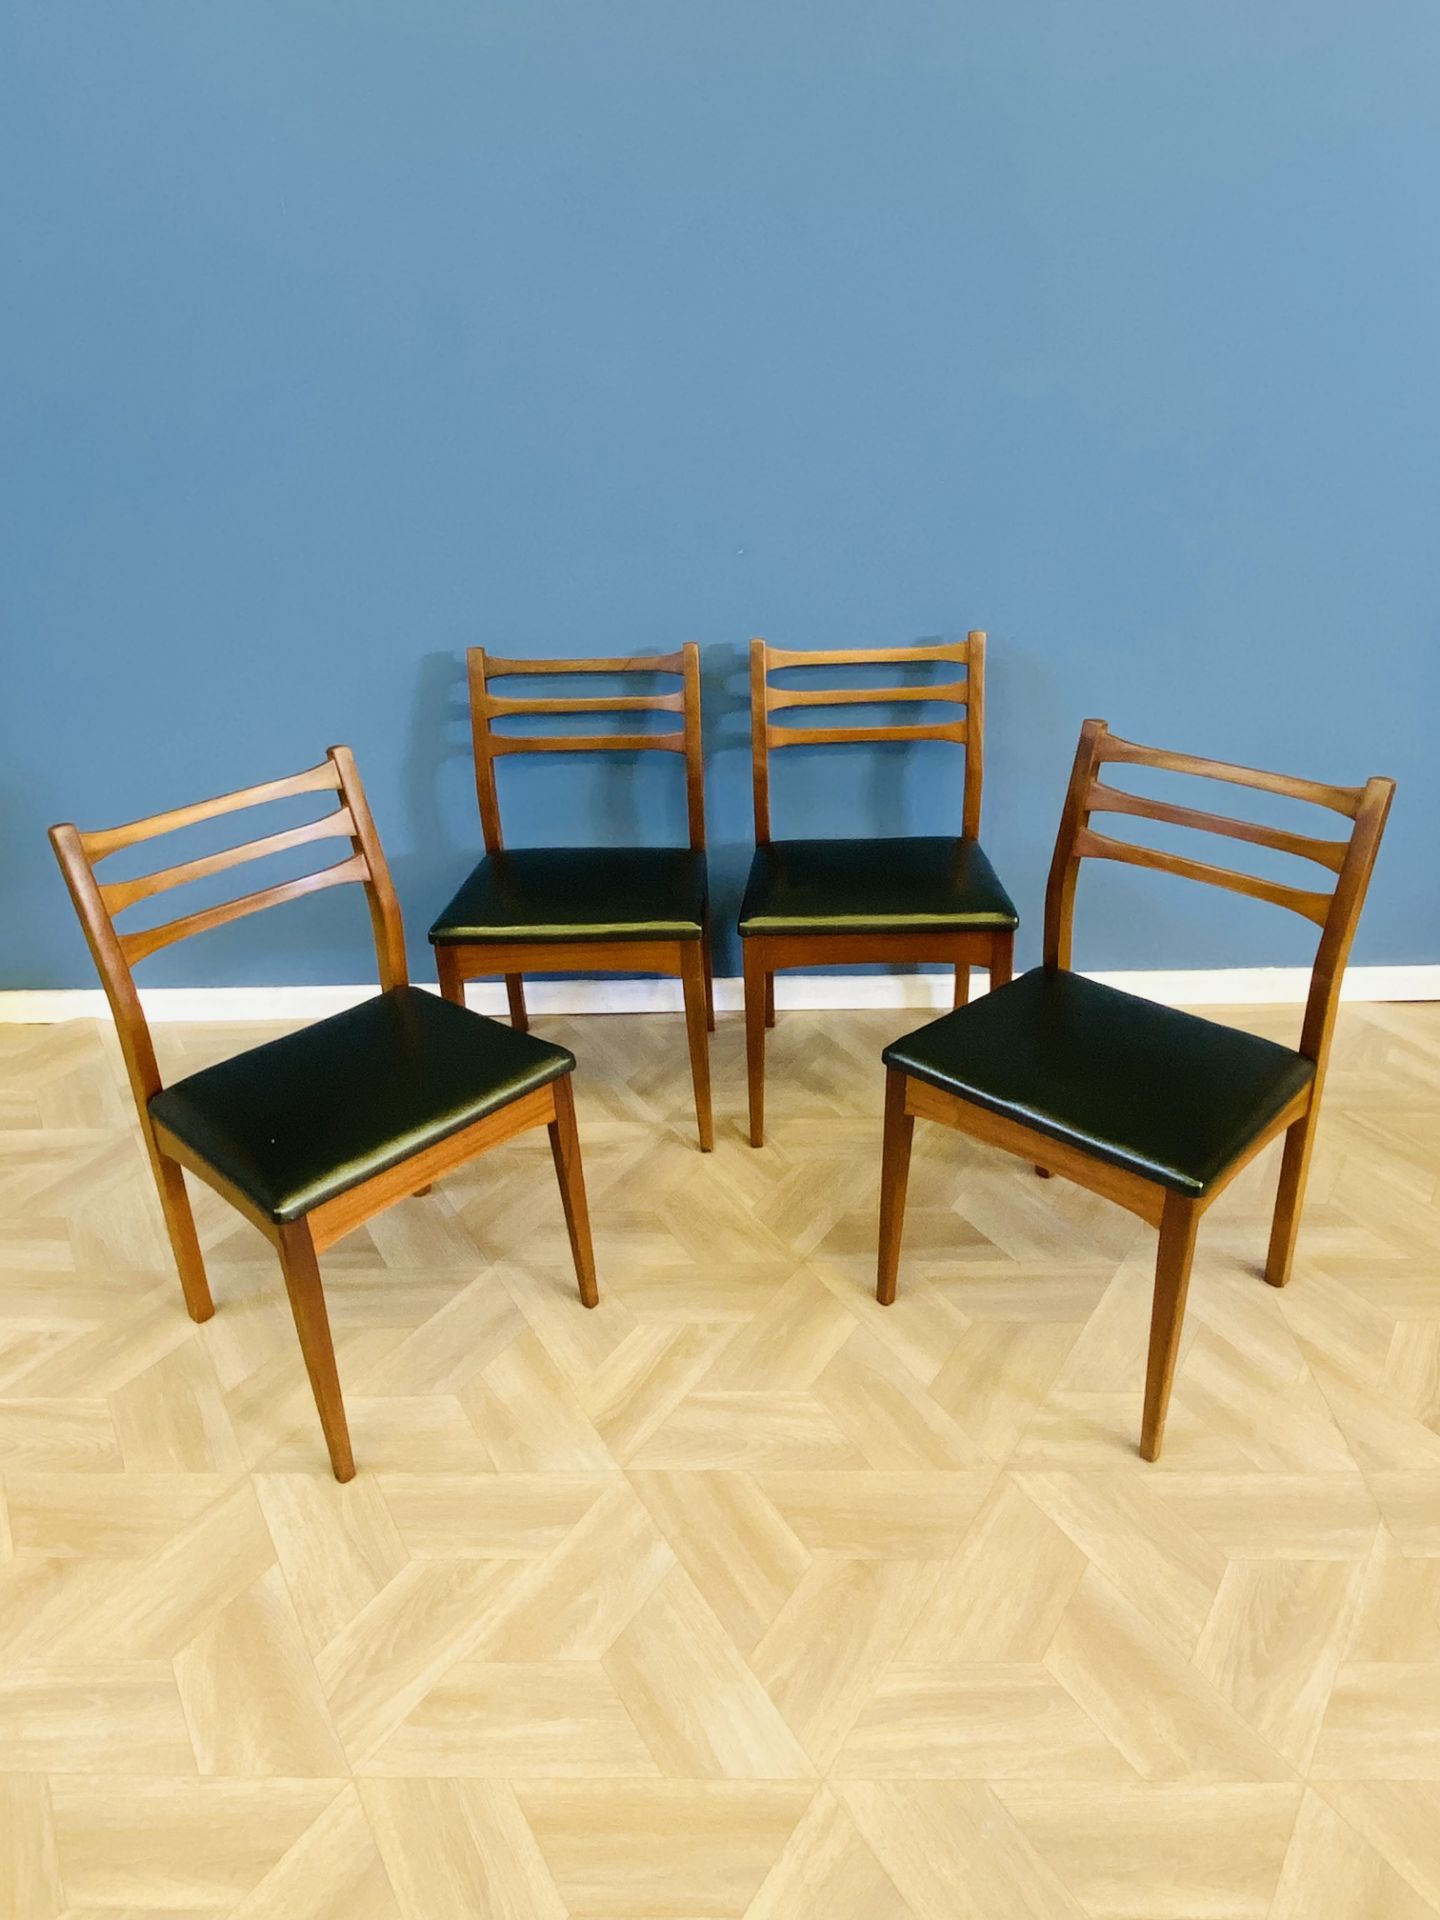 Set of four mid century teak dining chairs - Image 2 of 6